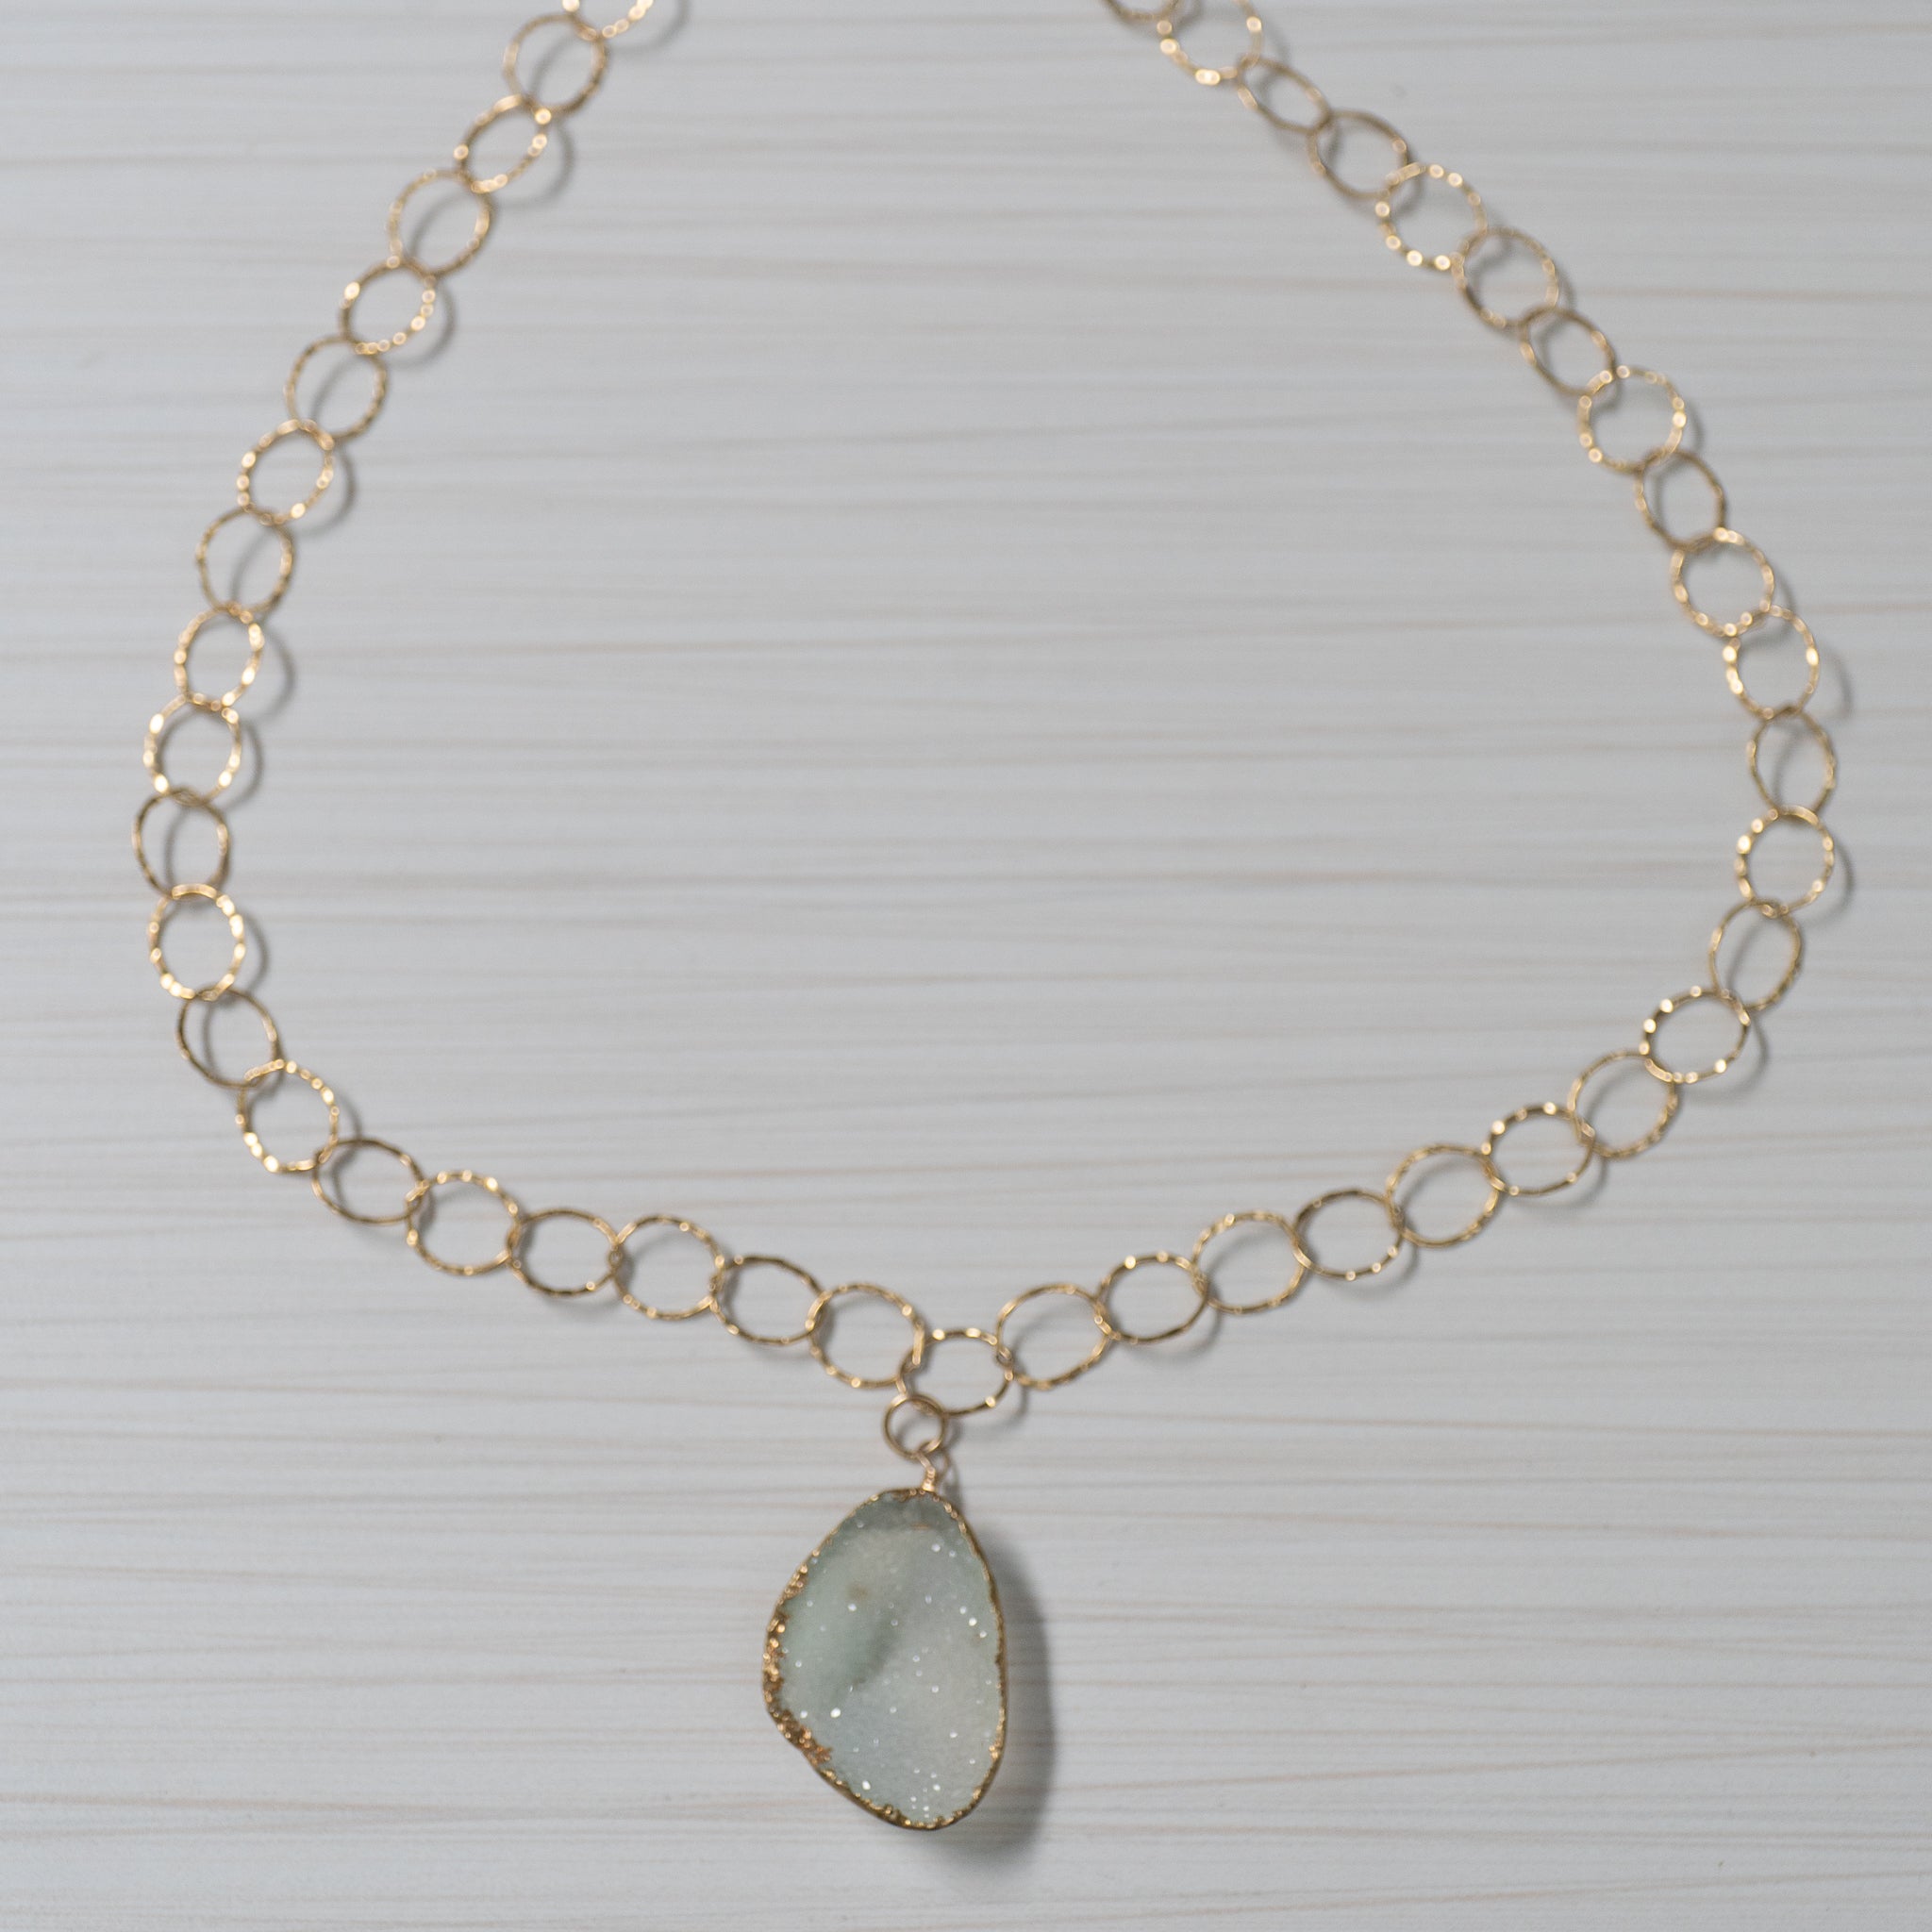 Blue druzy on gold chain necklace handmade in Hawaii by eve black jewelry  Edit alt text